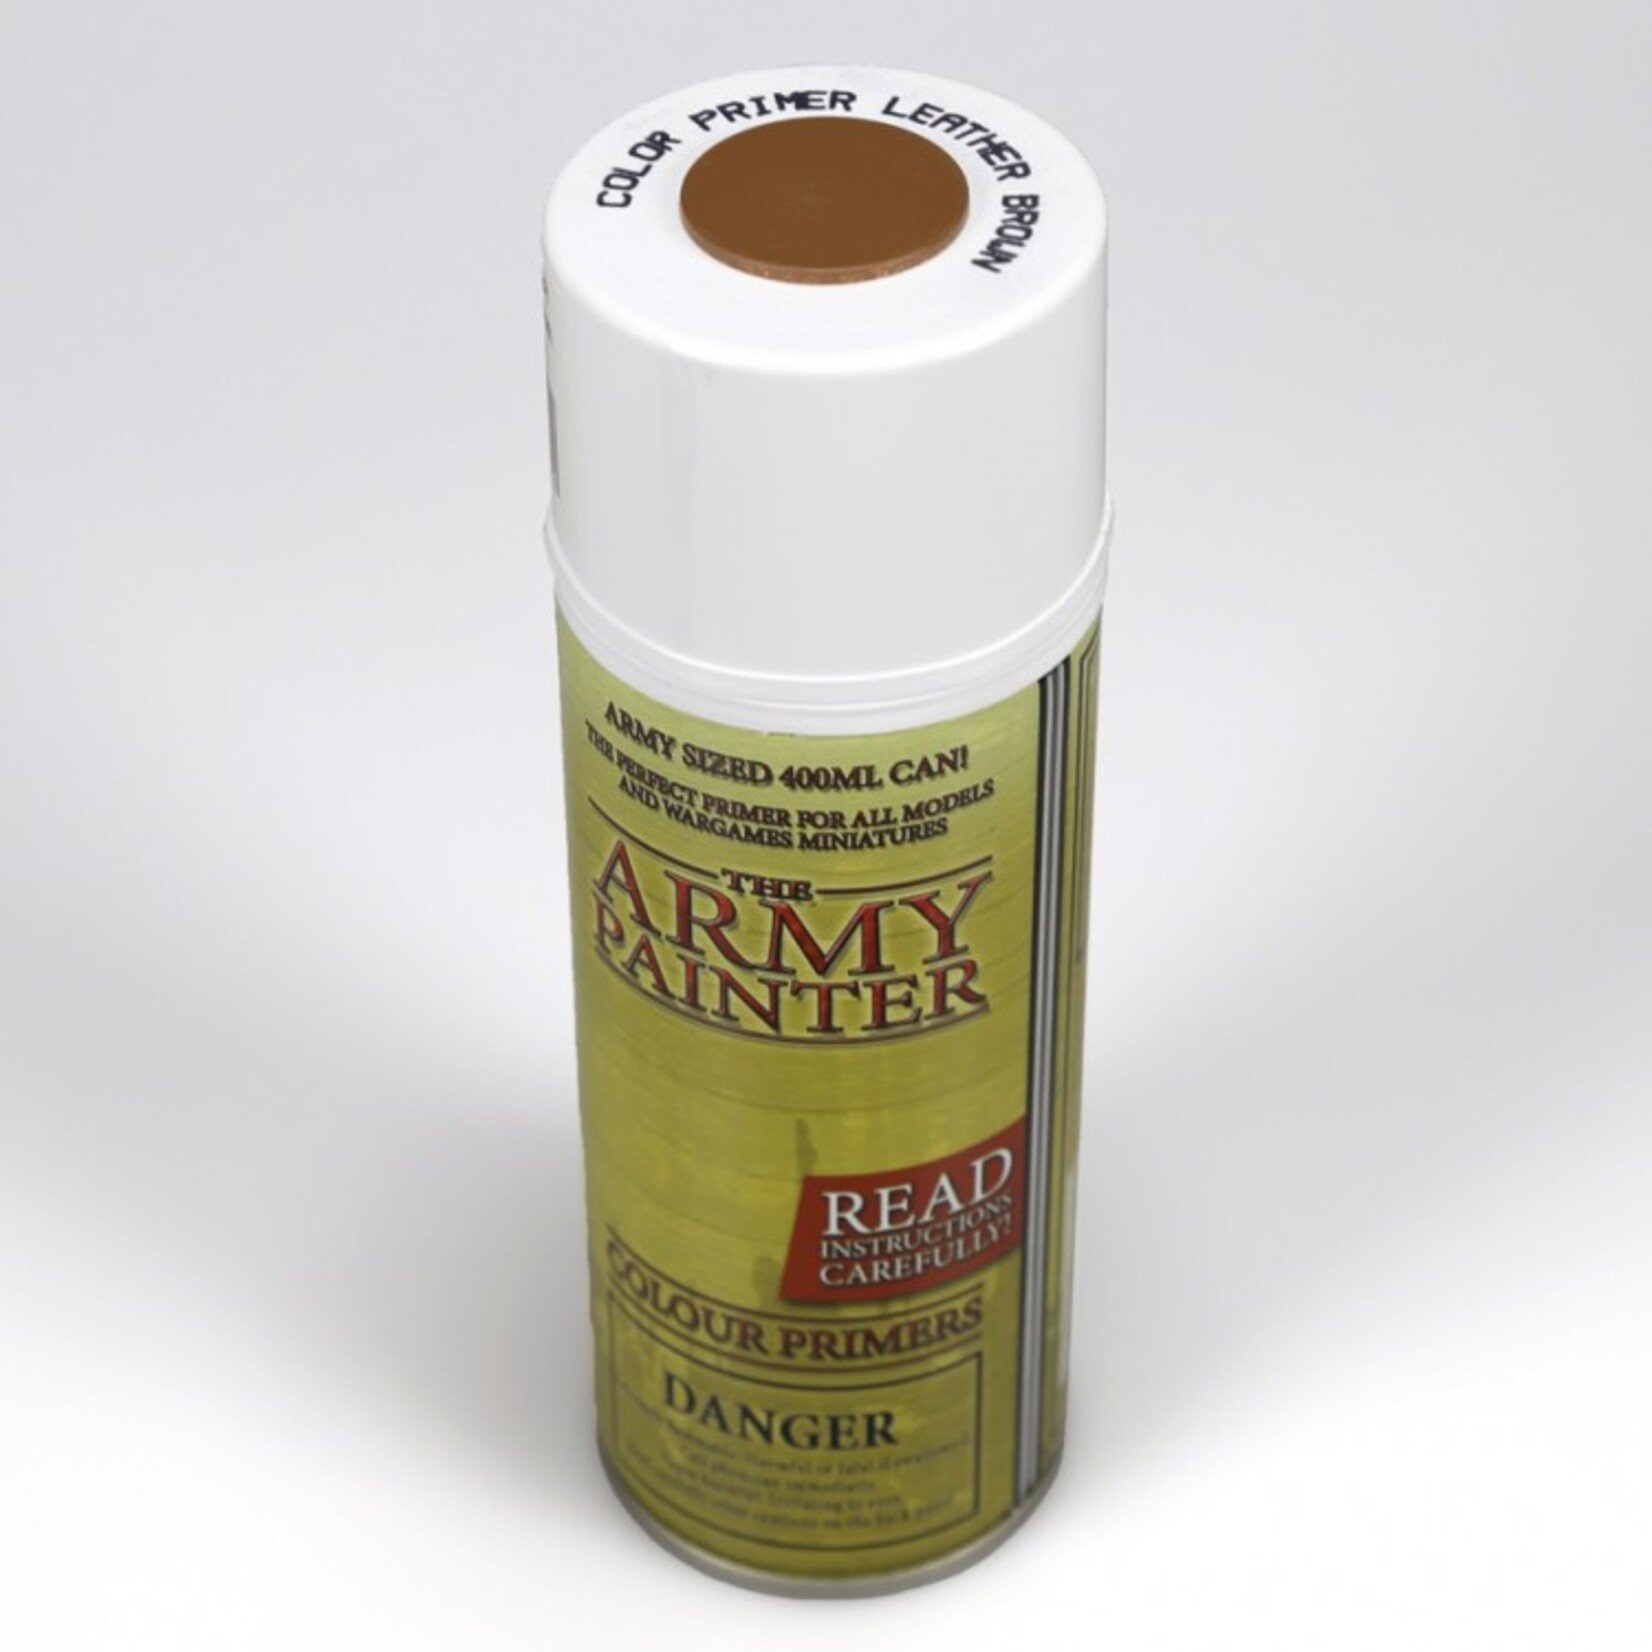 Army Painter Army Painter Colour Primer Spray Leather Brown